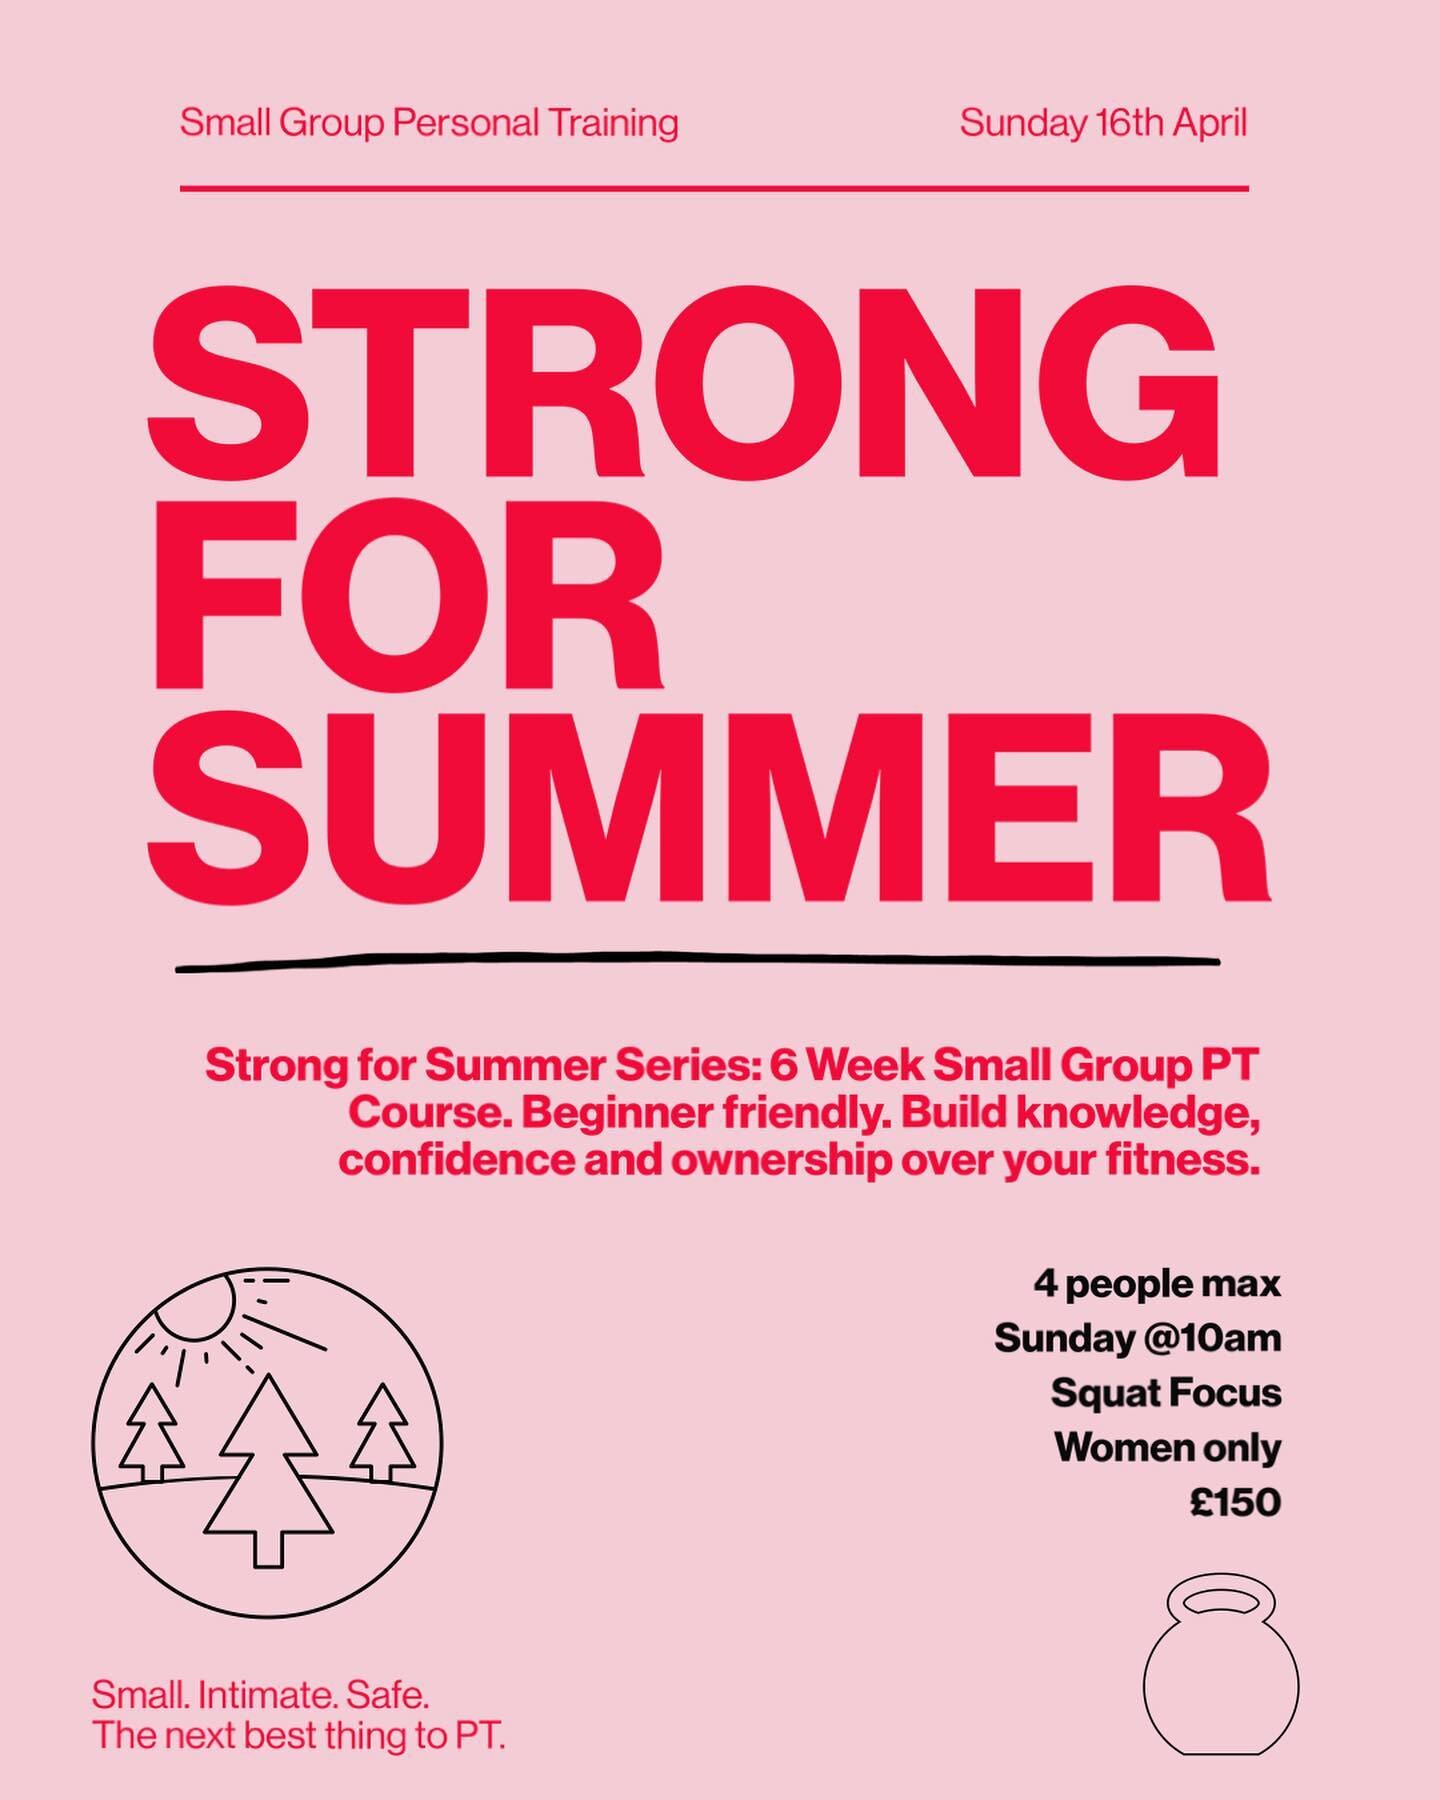 Here we go again! The second 6 week programme in my Strong for Summer Series starts next Sunday 15th April @10am

With the weather brightening up, what better way to get outdoors than to come and learn to lift alongside Mother Nature herself? We&rsqu